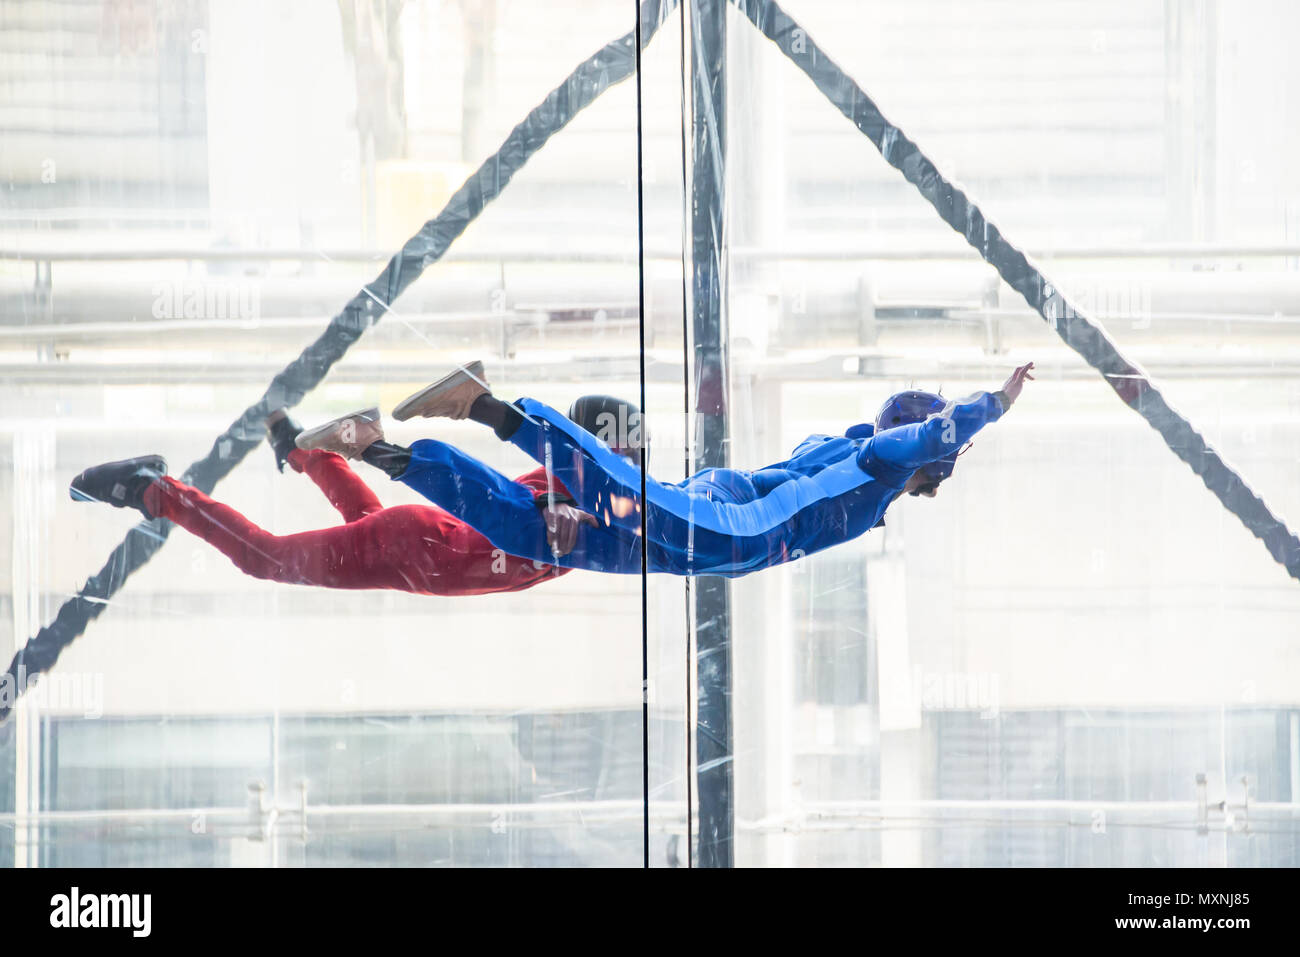 Skydivers in indoor wind tunnel, free fall simulator Stock Photo